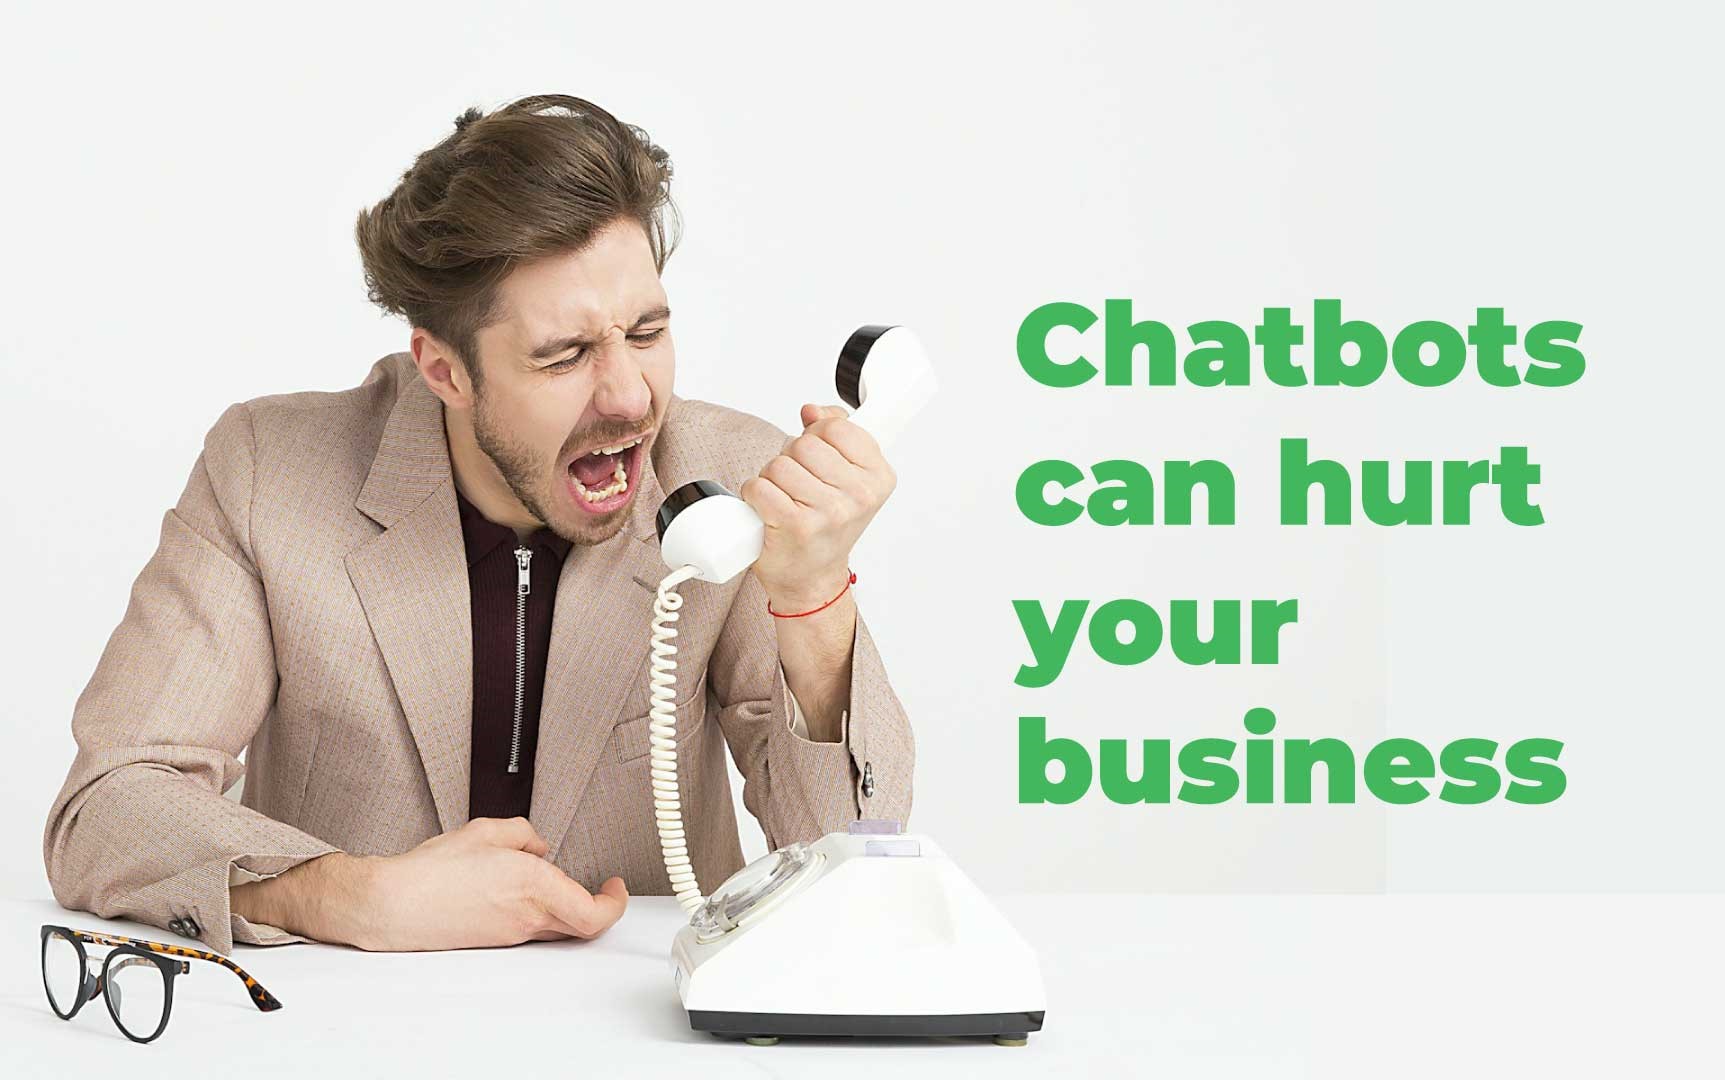 Image of a man yelling at a phone receiver with the text, "Chatbots can hurt your business."